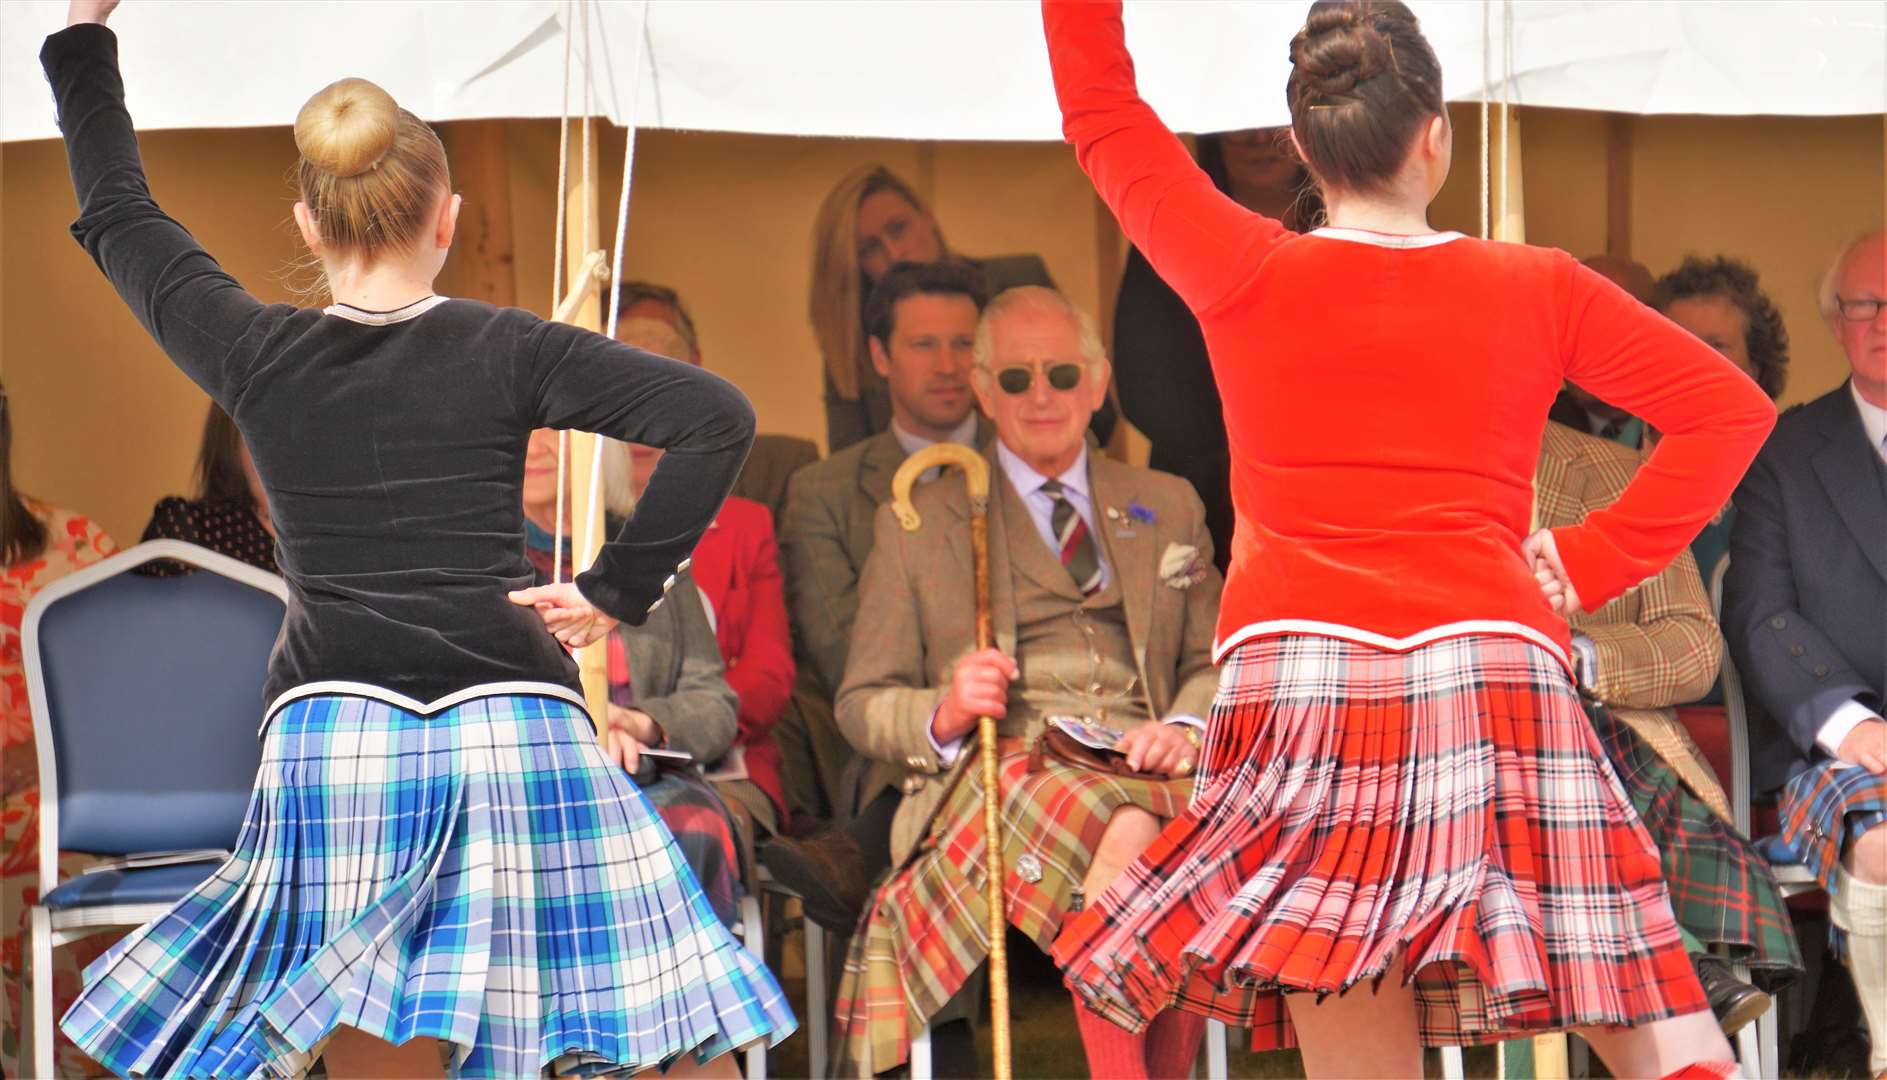 Girls from the Tanya Horne School of Dancing provided entertainment for the Royal Tent. Picture: DGS